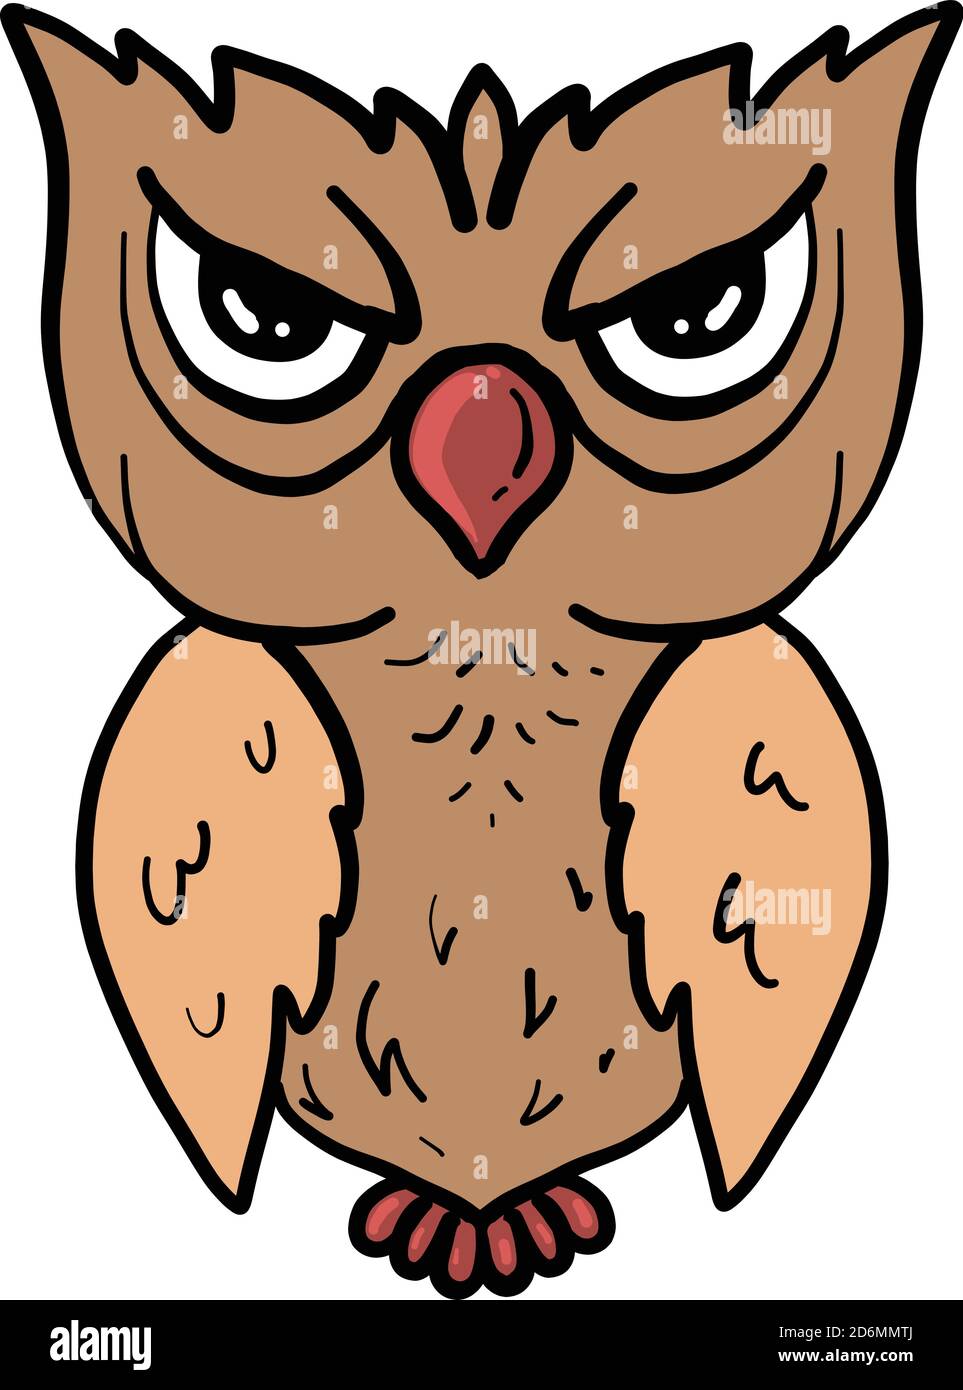 Angry Owl Illustration Vector On White Background Stock Vector Image